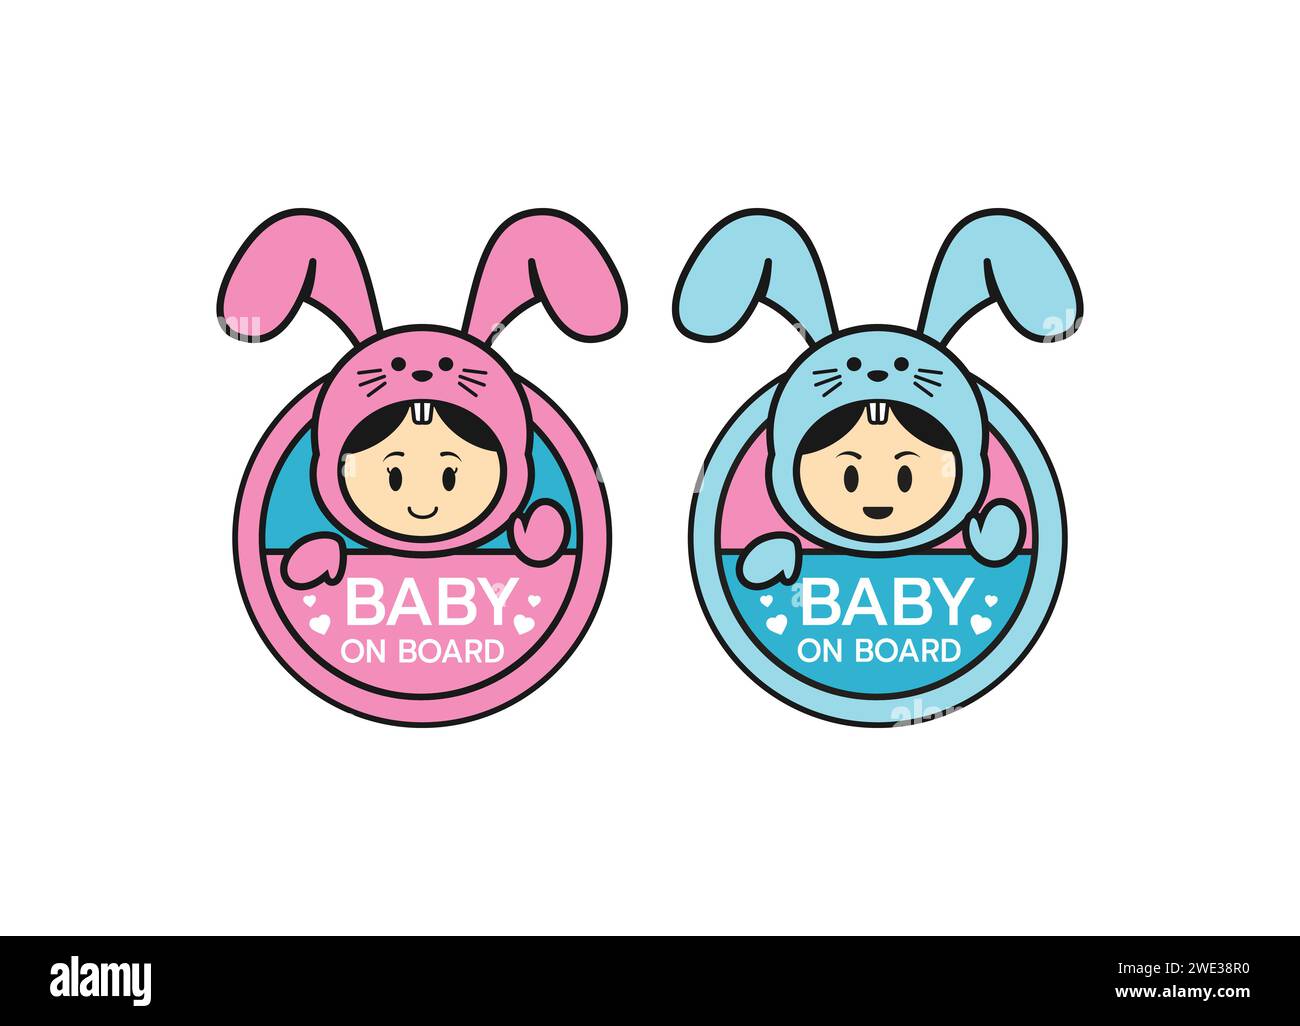 Baby on board sign logo icon. Child safety sticker warning emblem. Cute Baby safety design illustration,Funny small smiling boy and girl wearing bunny Stock Vector